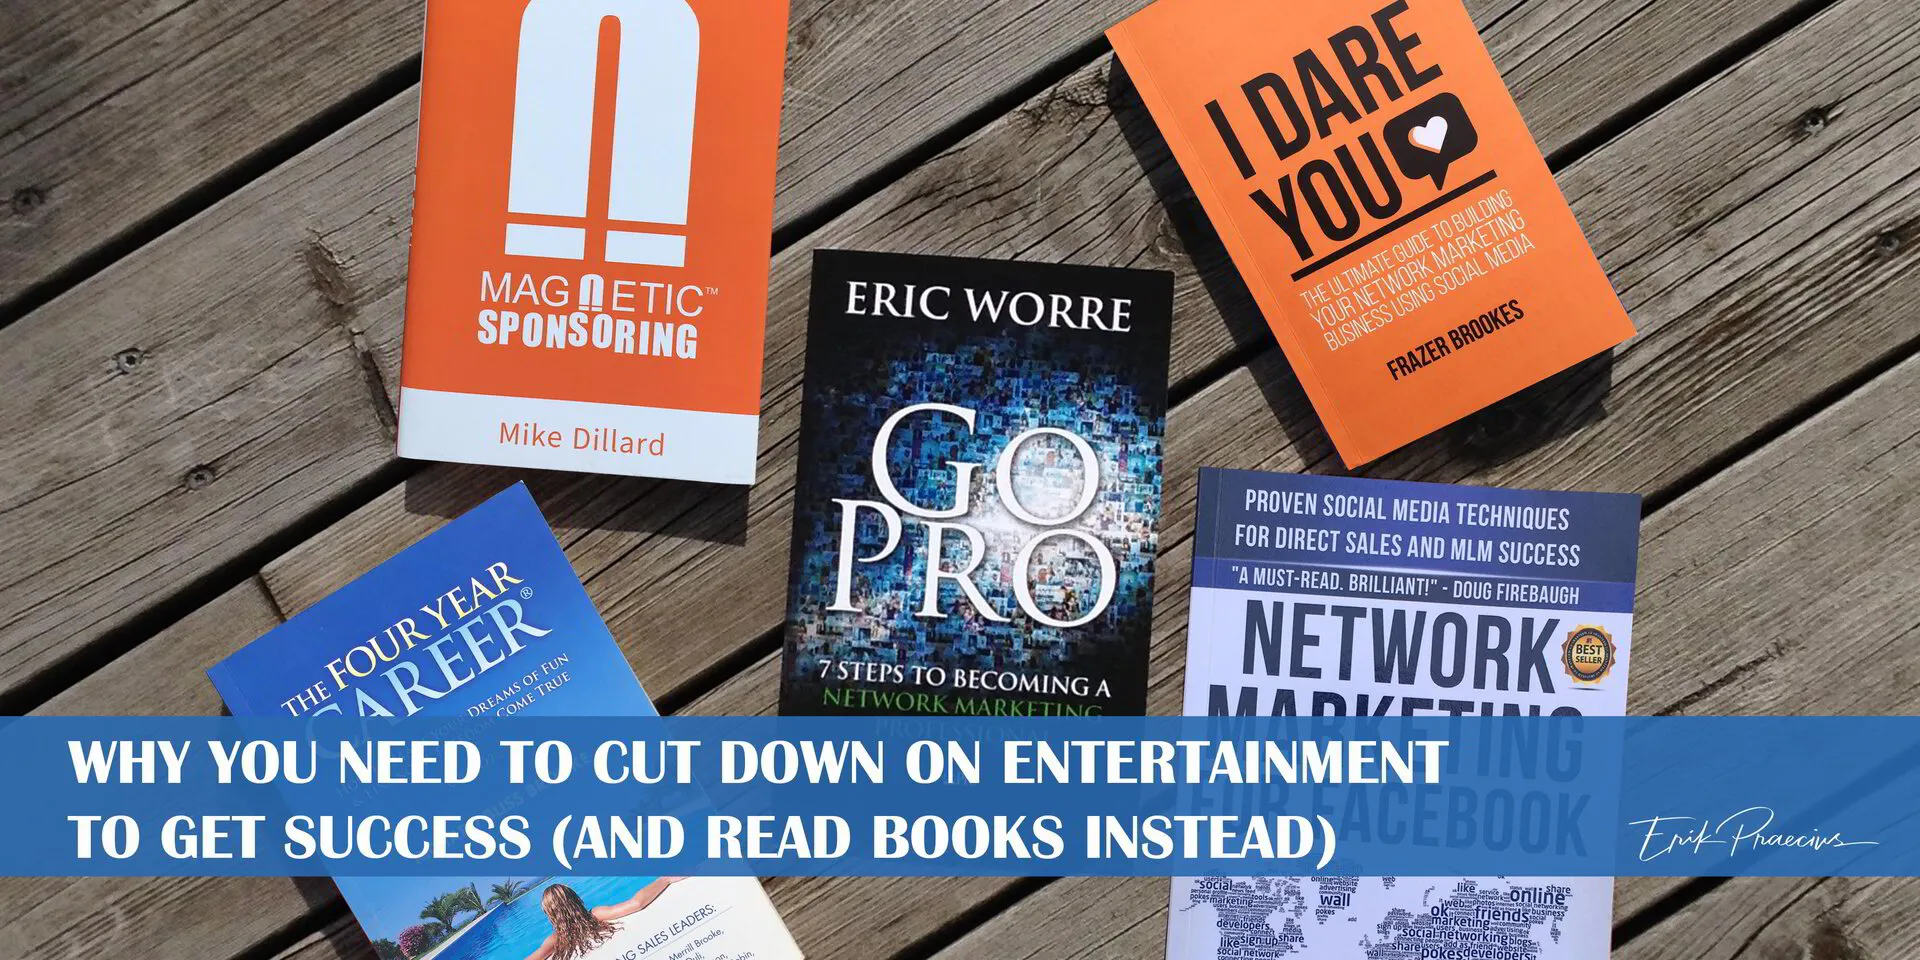 Why You Need to Cut Down on Entertainment to get Success (and read books instead)